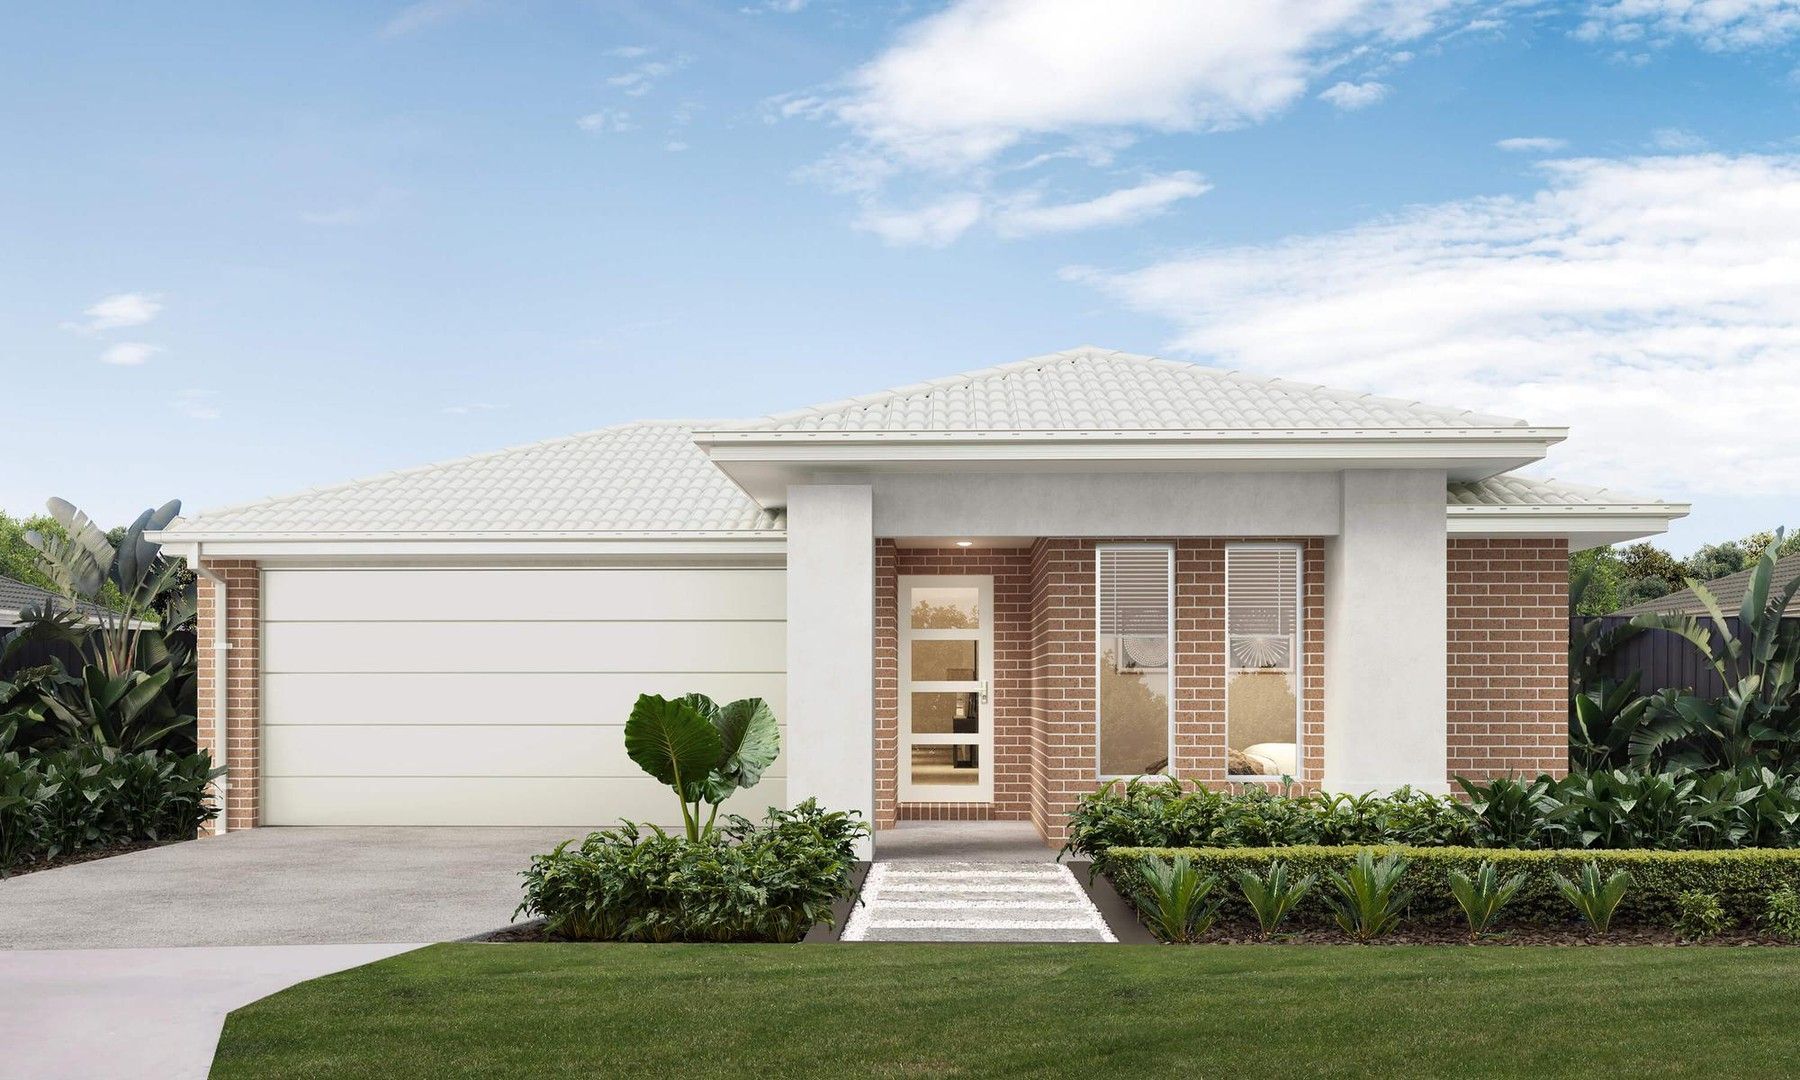 4 bedrooms New House & Land in 622 Sapphire Estate CRANBOURNE VIC, 3977